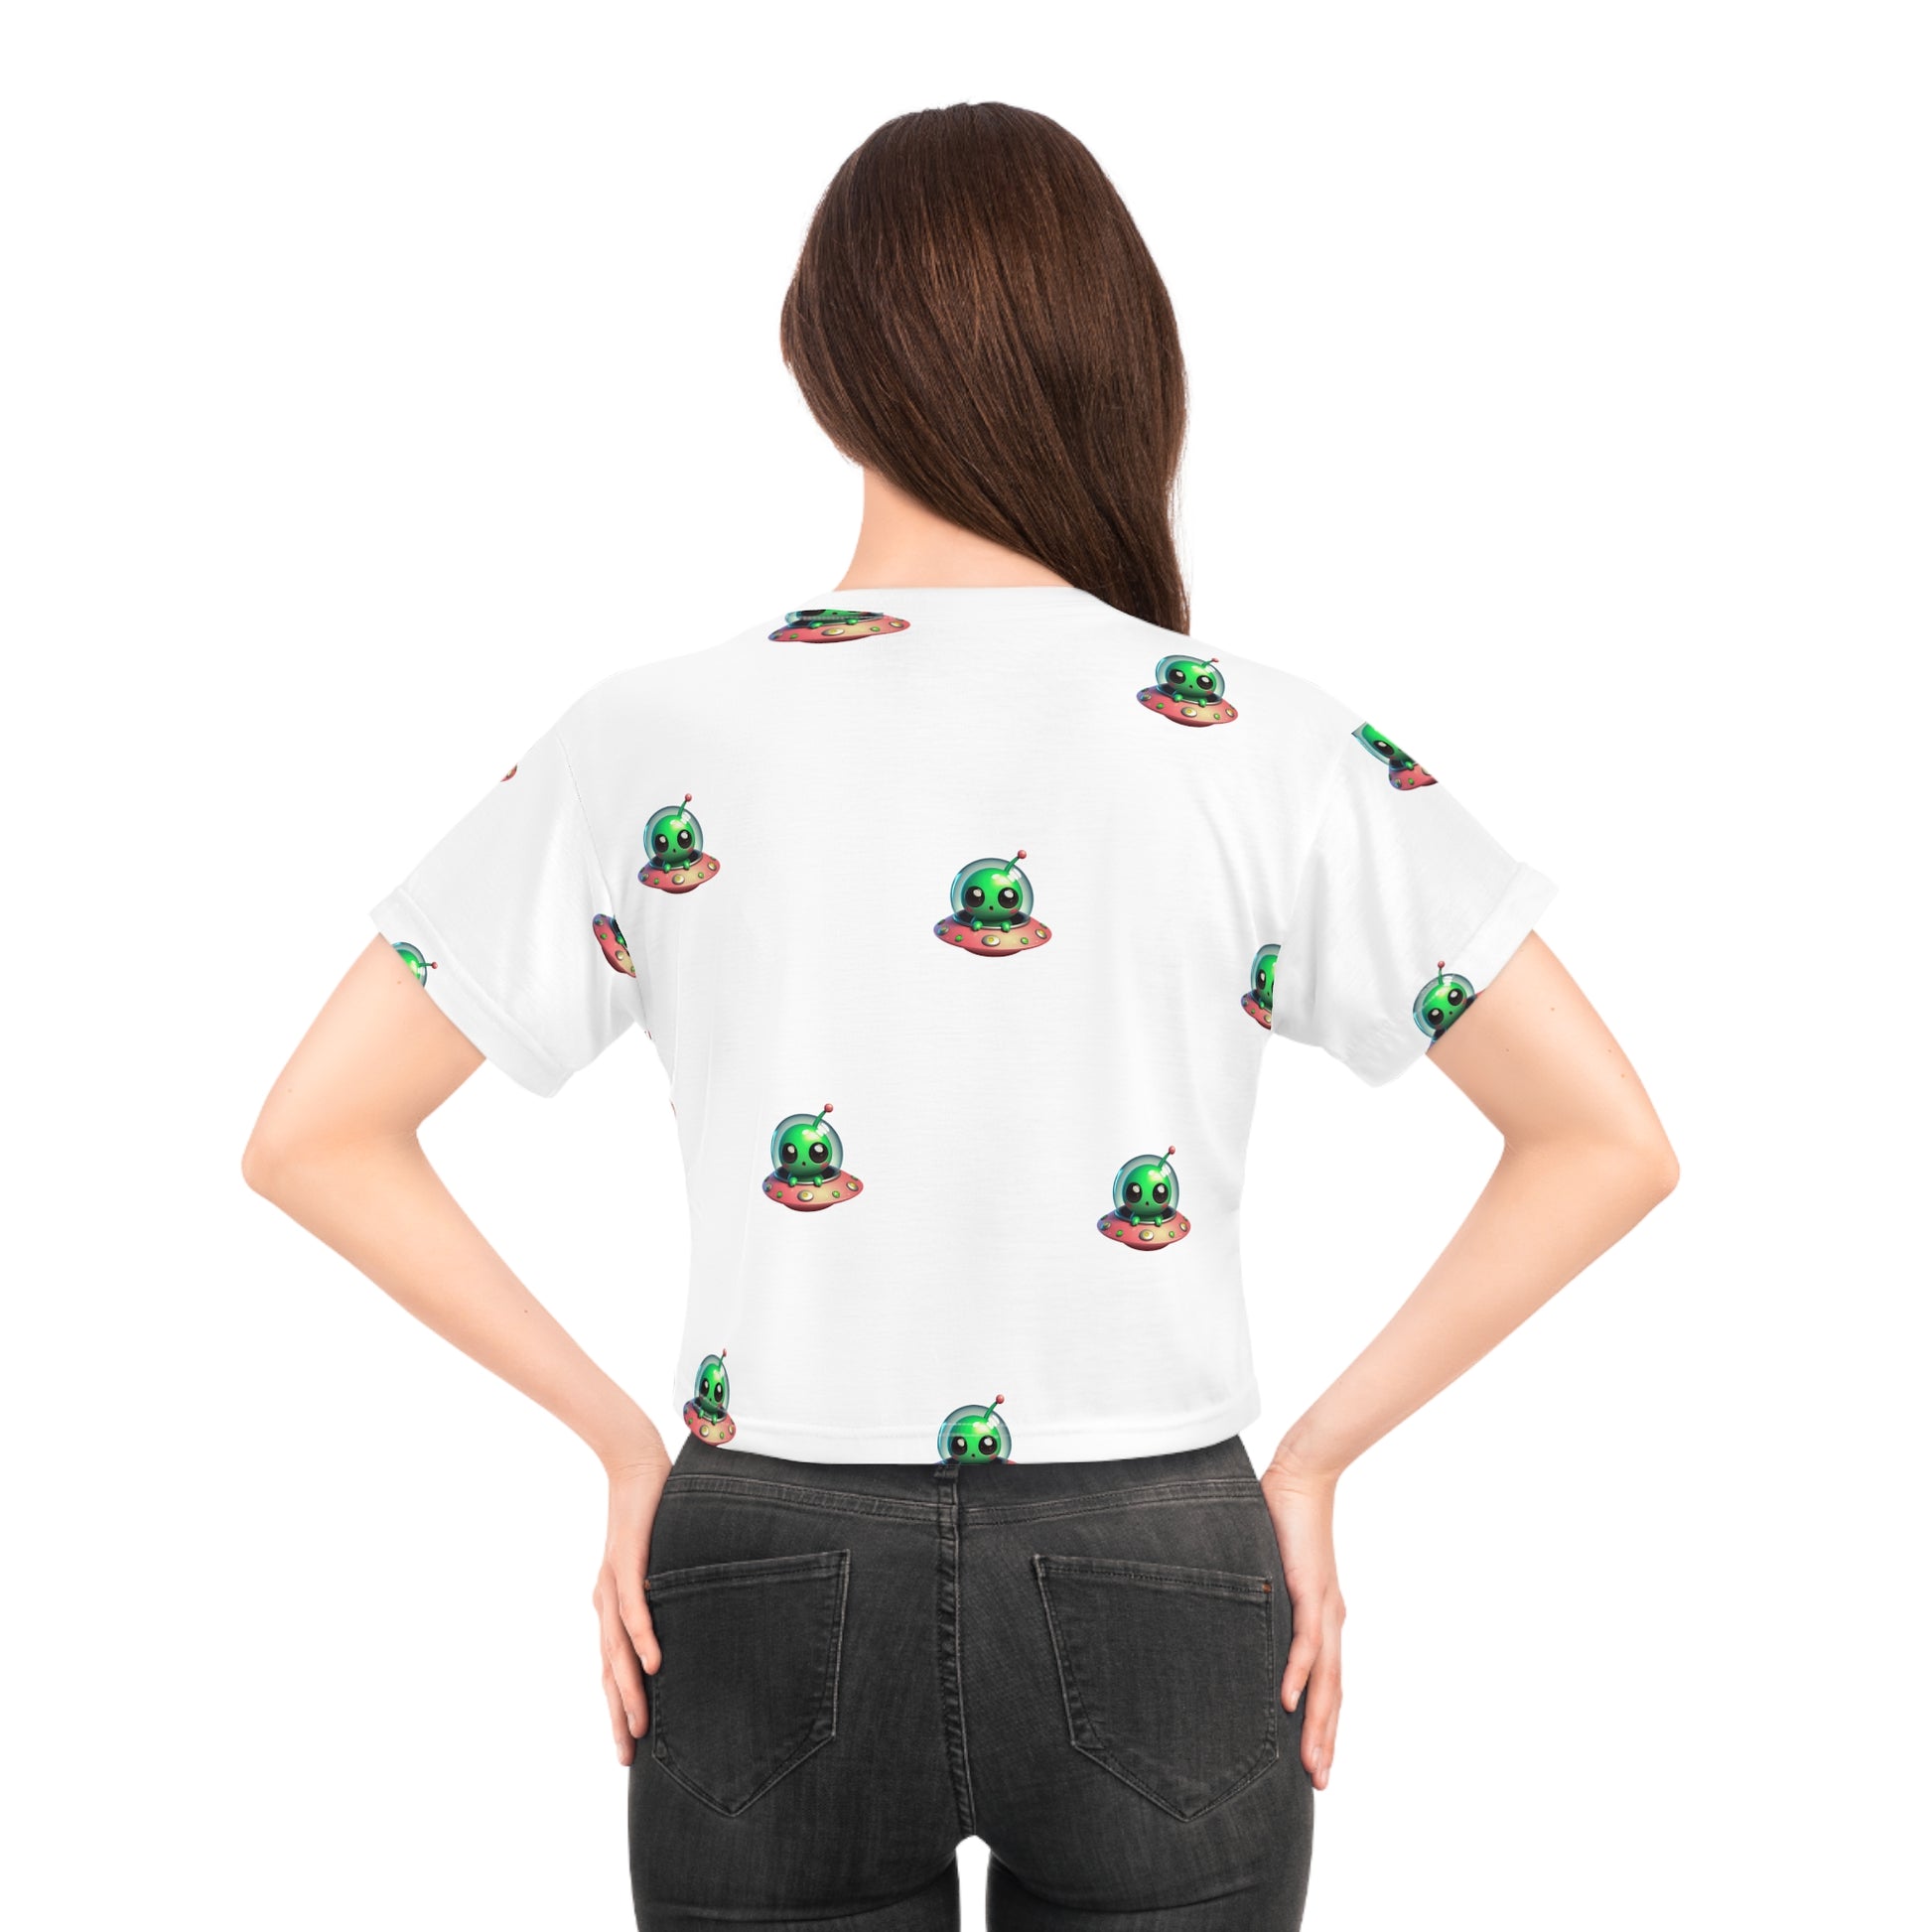 This Luna the Plush Pilot crop top is the perfect way to add a touch of whimsy and wonder to your everyday wardrobe. So, grab yours today and blast off into a world of cuteness and cosmic style!